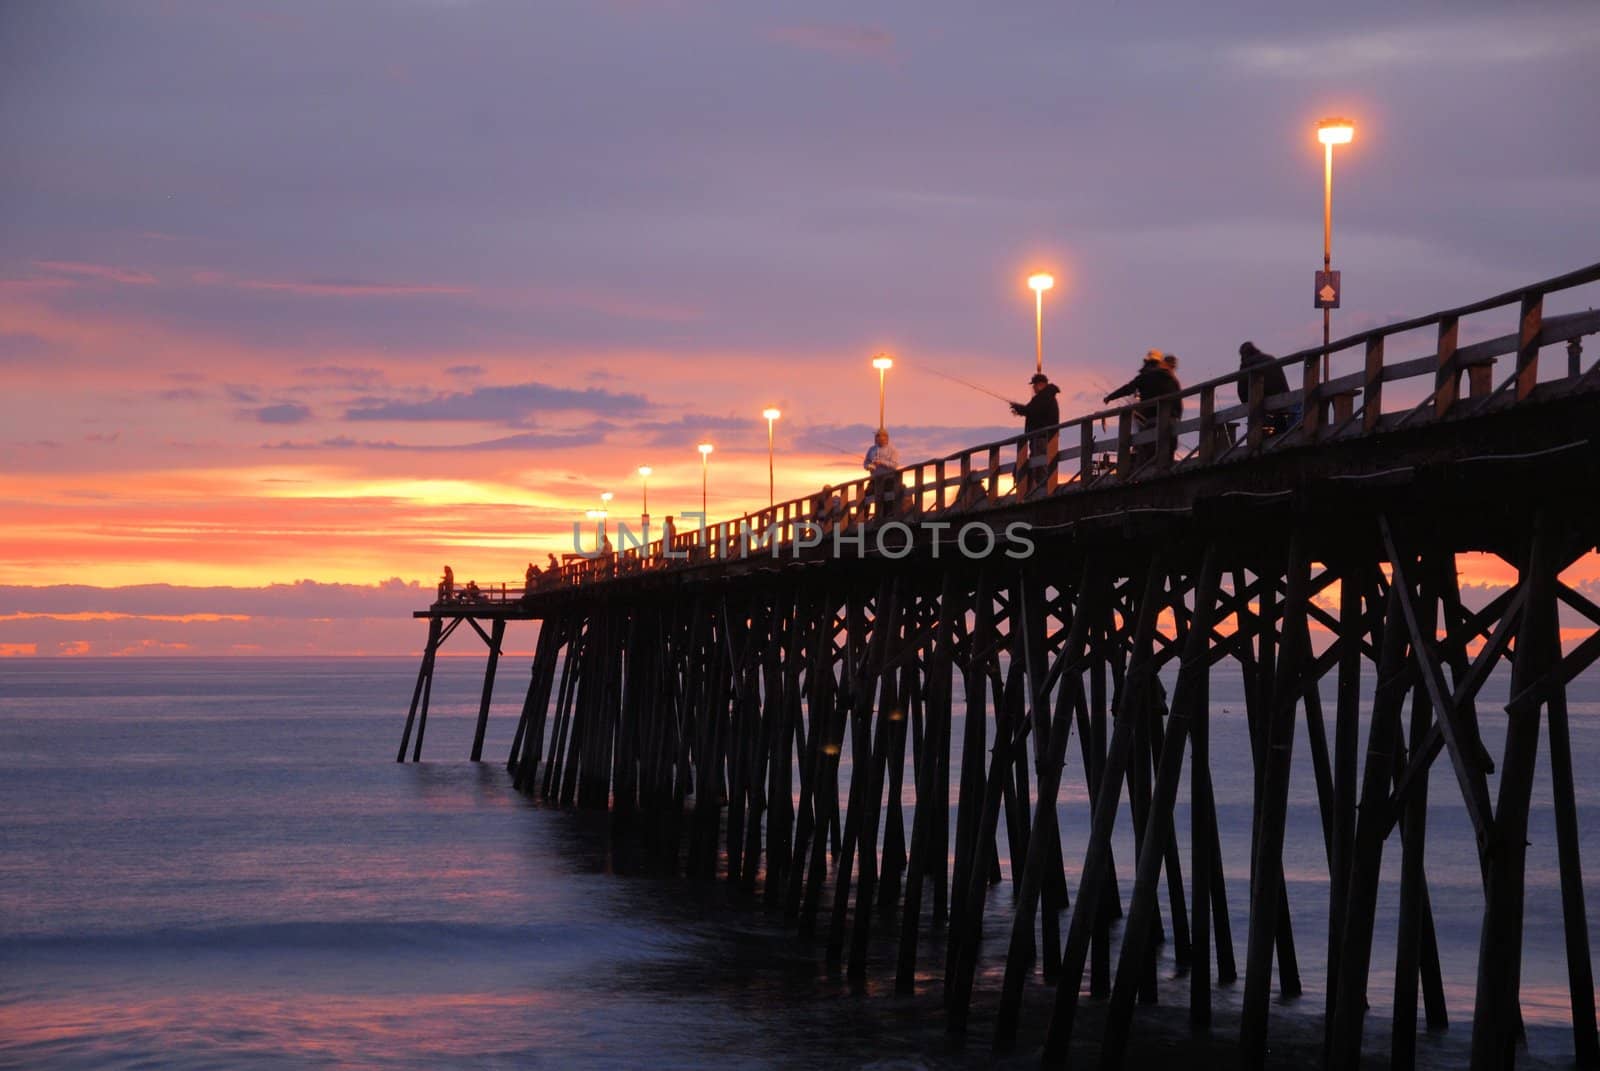 The sunrise over the pier at Kure Beach with fisherman on the pier.